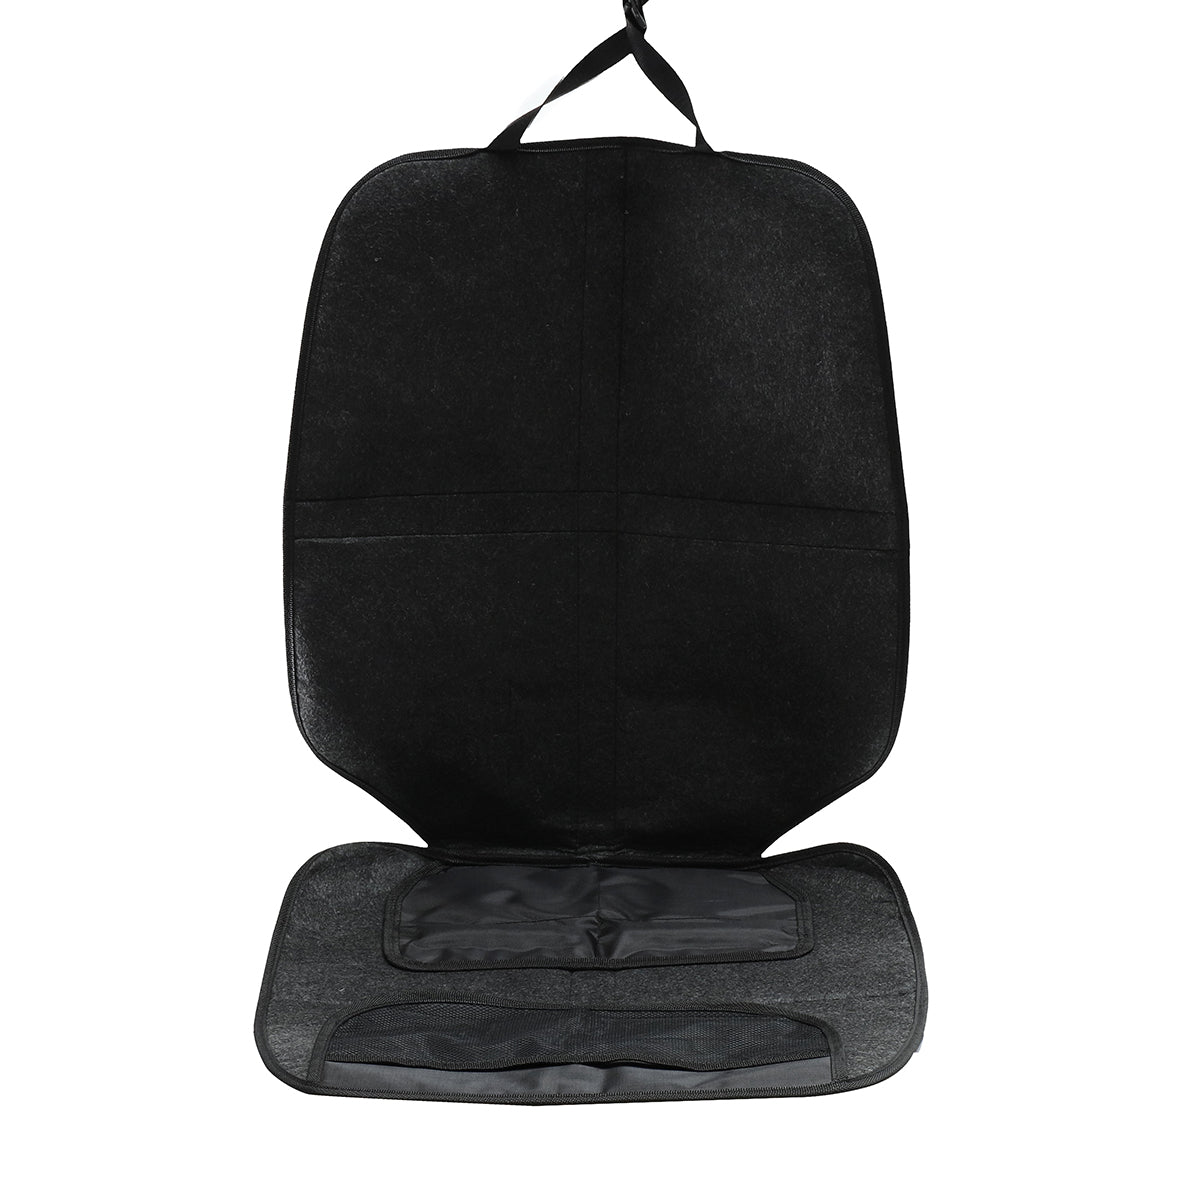 Single Long Black 55cm Leather With Pocket baby Car Seat Cushion Non-slip Wear-resistant Anti-dirty Waterproof Pad - Auto GoShop